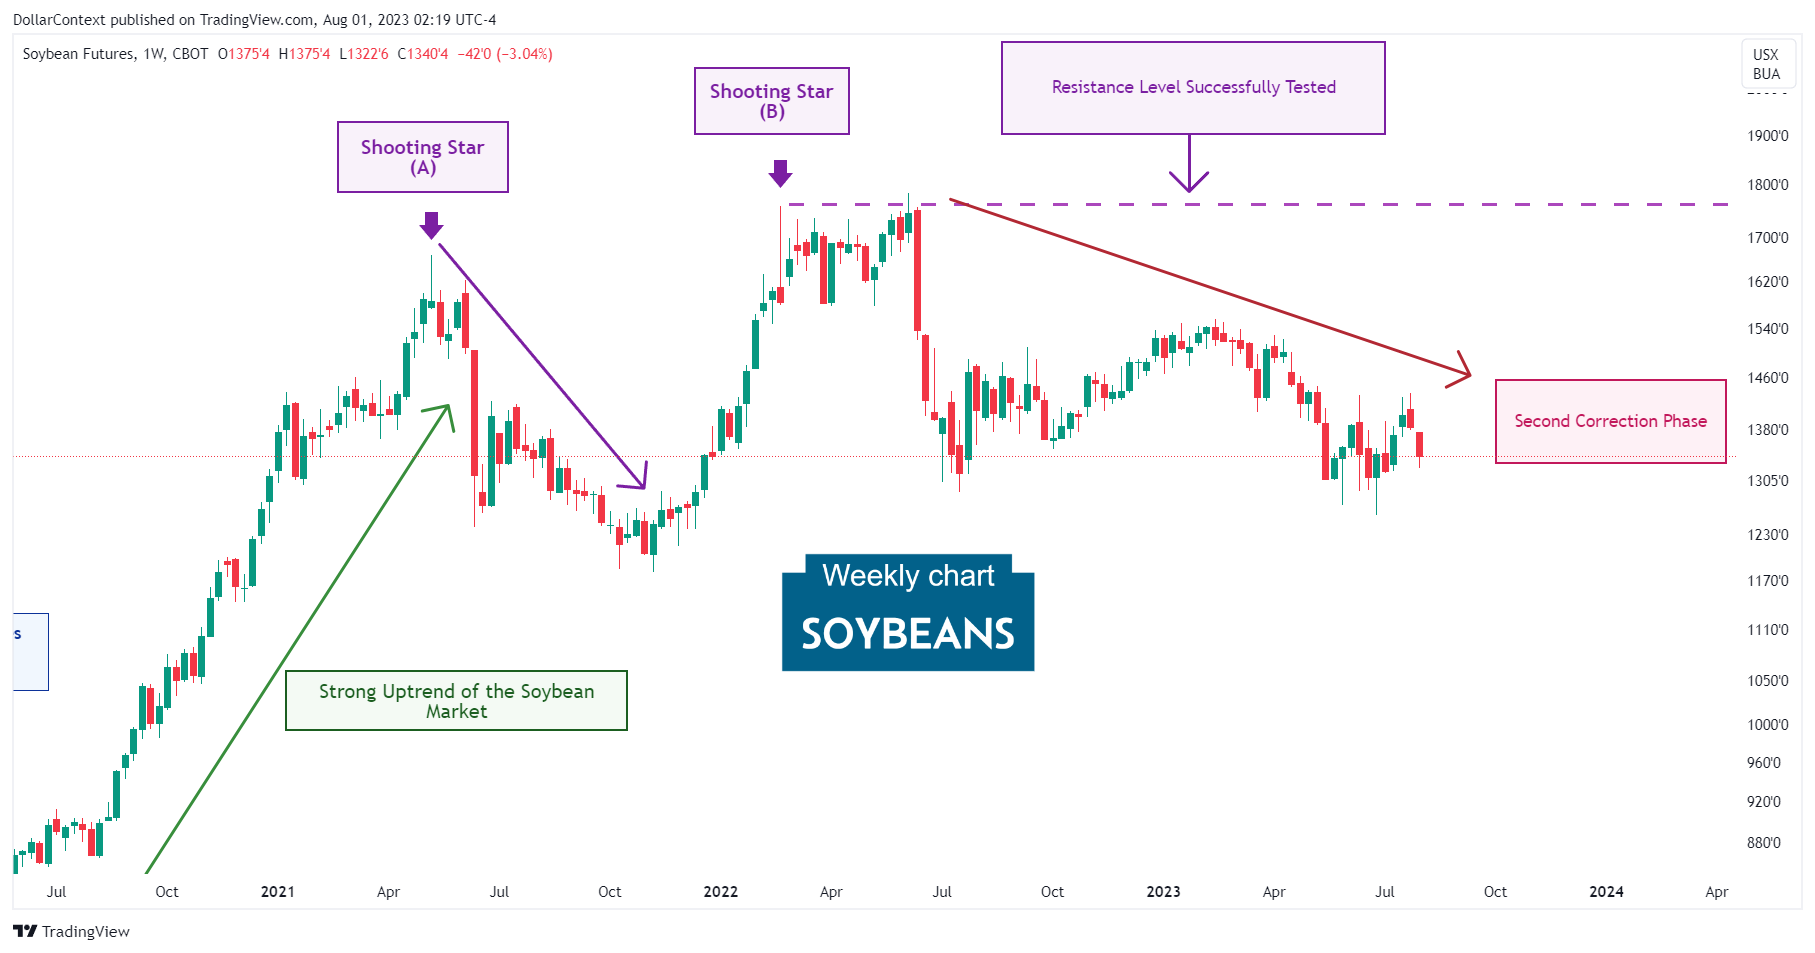 Soybean Futures: Two Shooting Stars. May 2021–February 2022 (Weekly Chart)